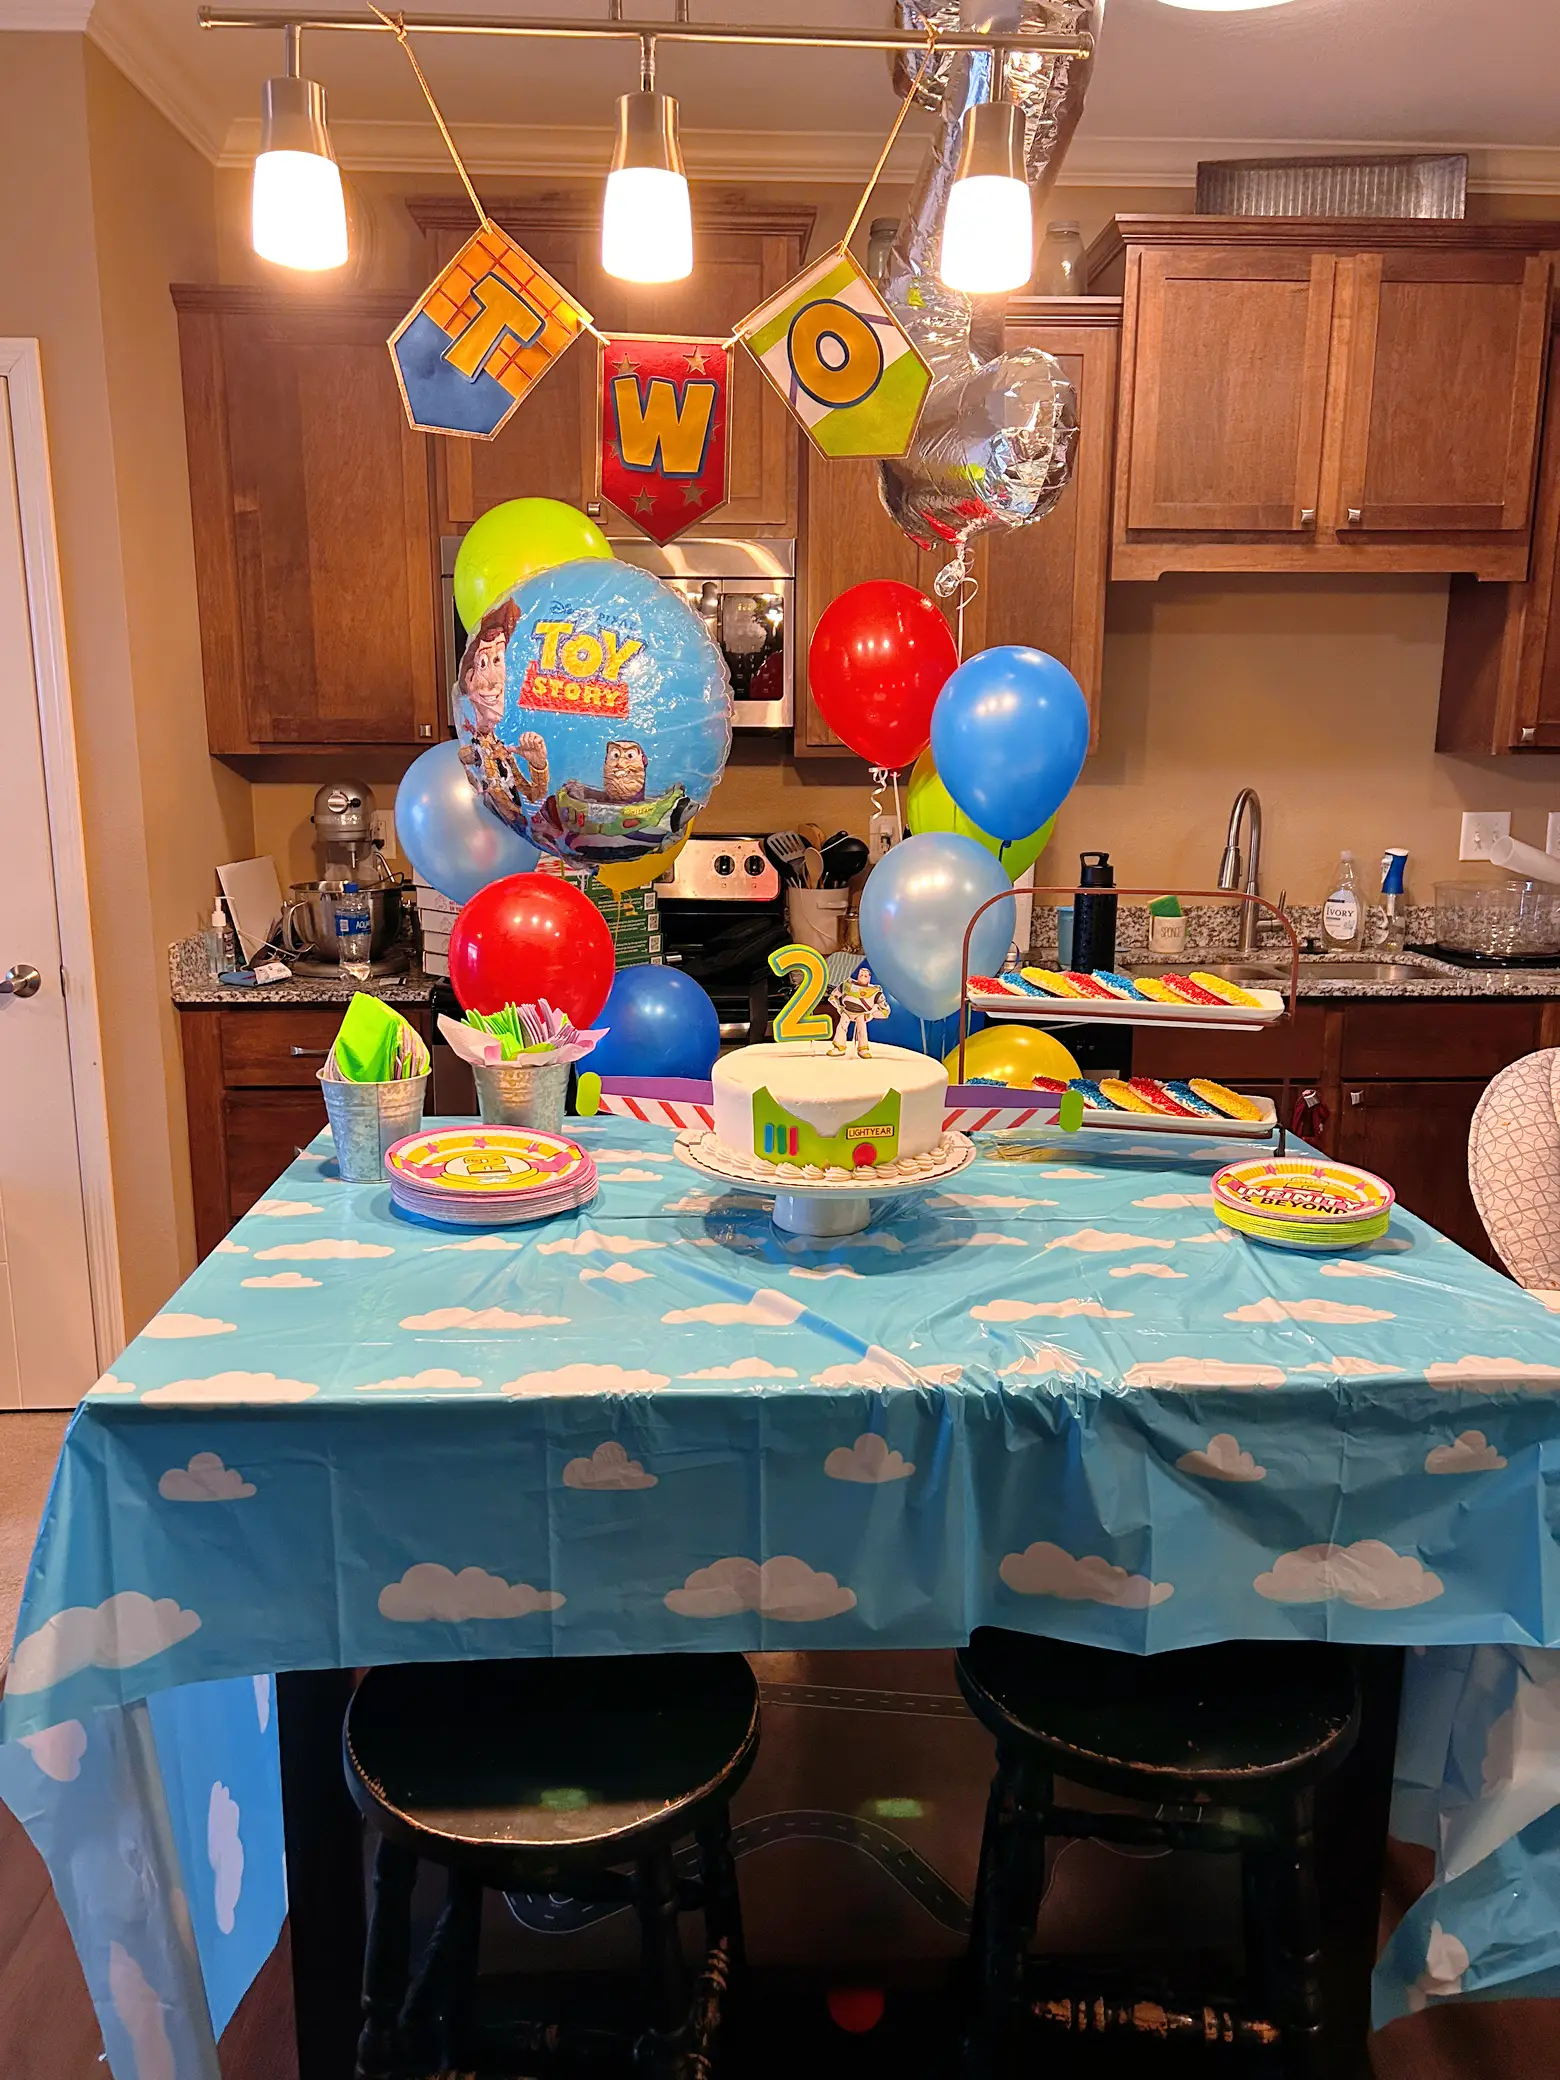 Toy Story Party Decorations, Join Forky Toy Story 4 Birthday Decor,  Tablecloth, Tableware of Napkins, Plates, Cups, Centerpieces, Banner, Buzz  